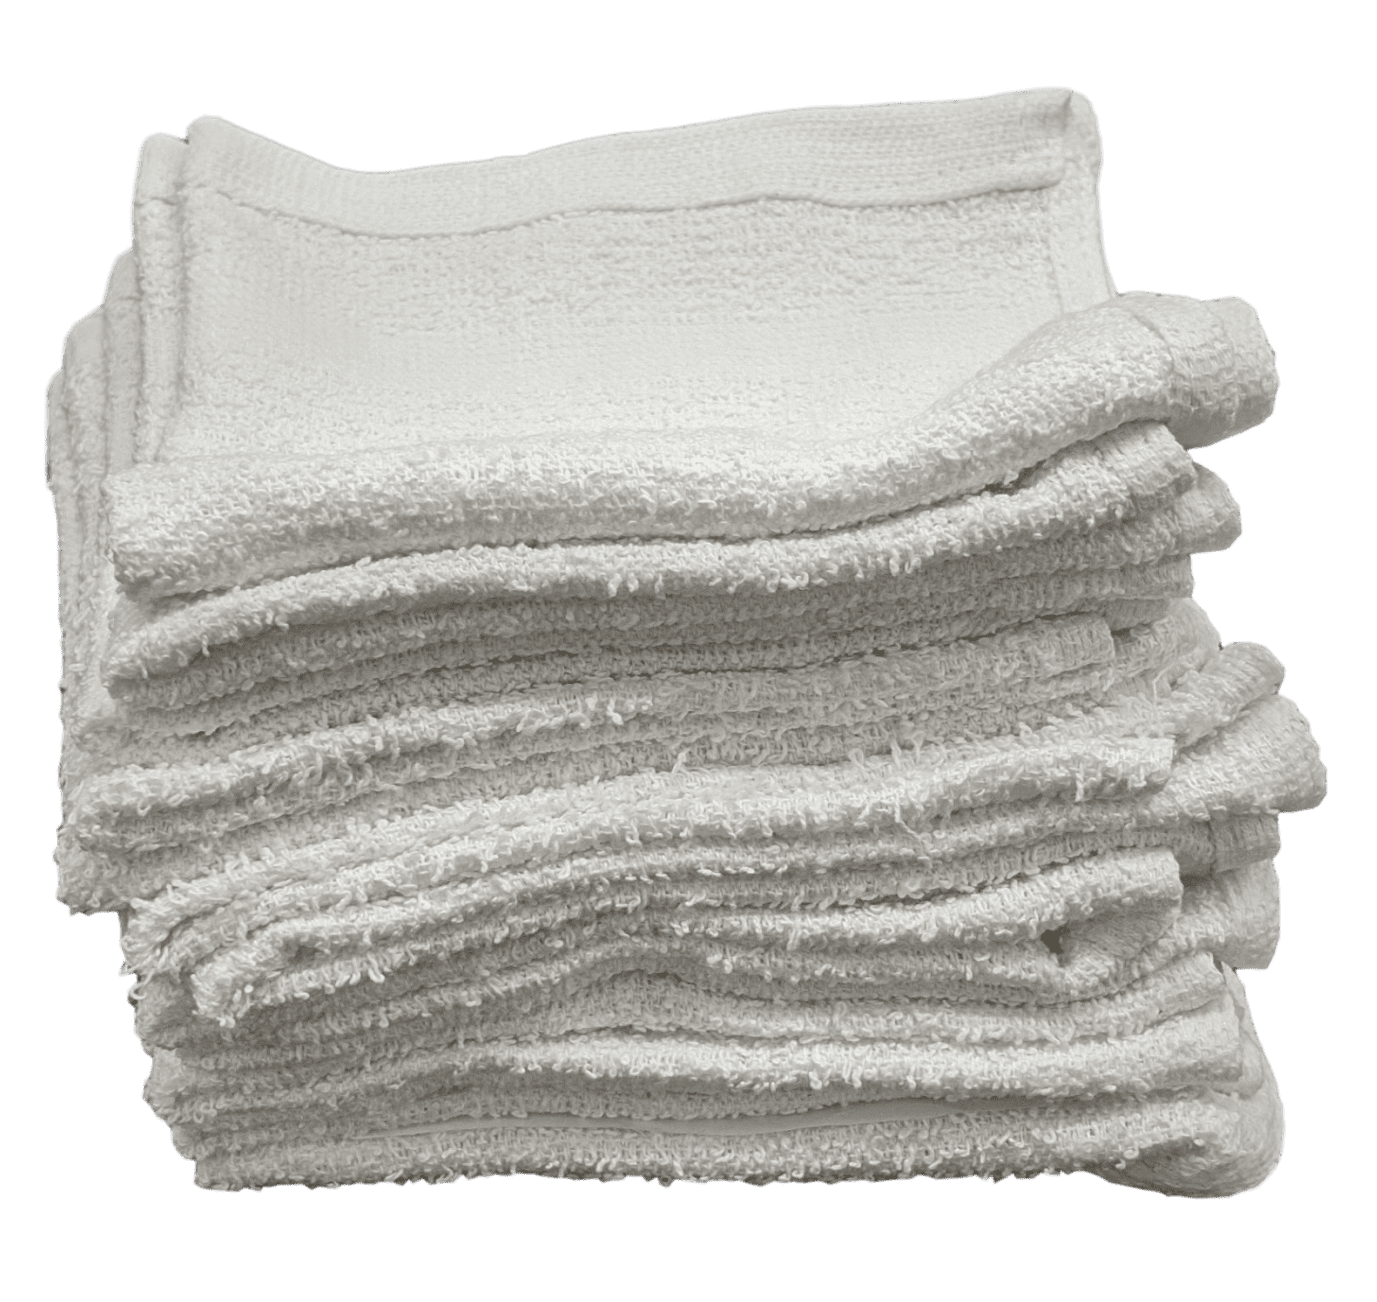 White Shop Towels 12 x 12 Cleaning Rags Homes Cars Reusable Cotton Wash  Cloth